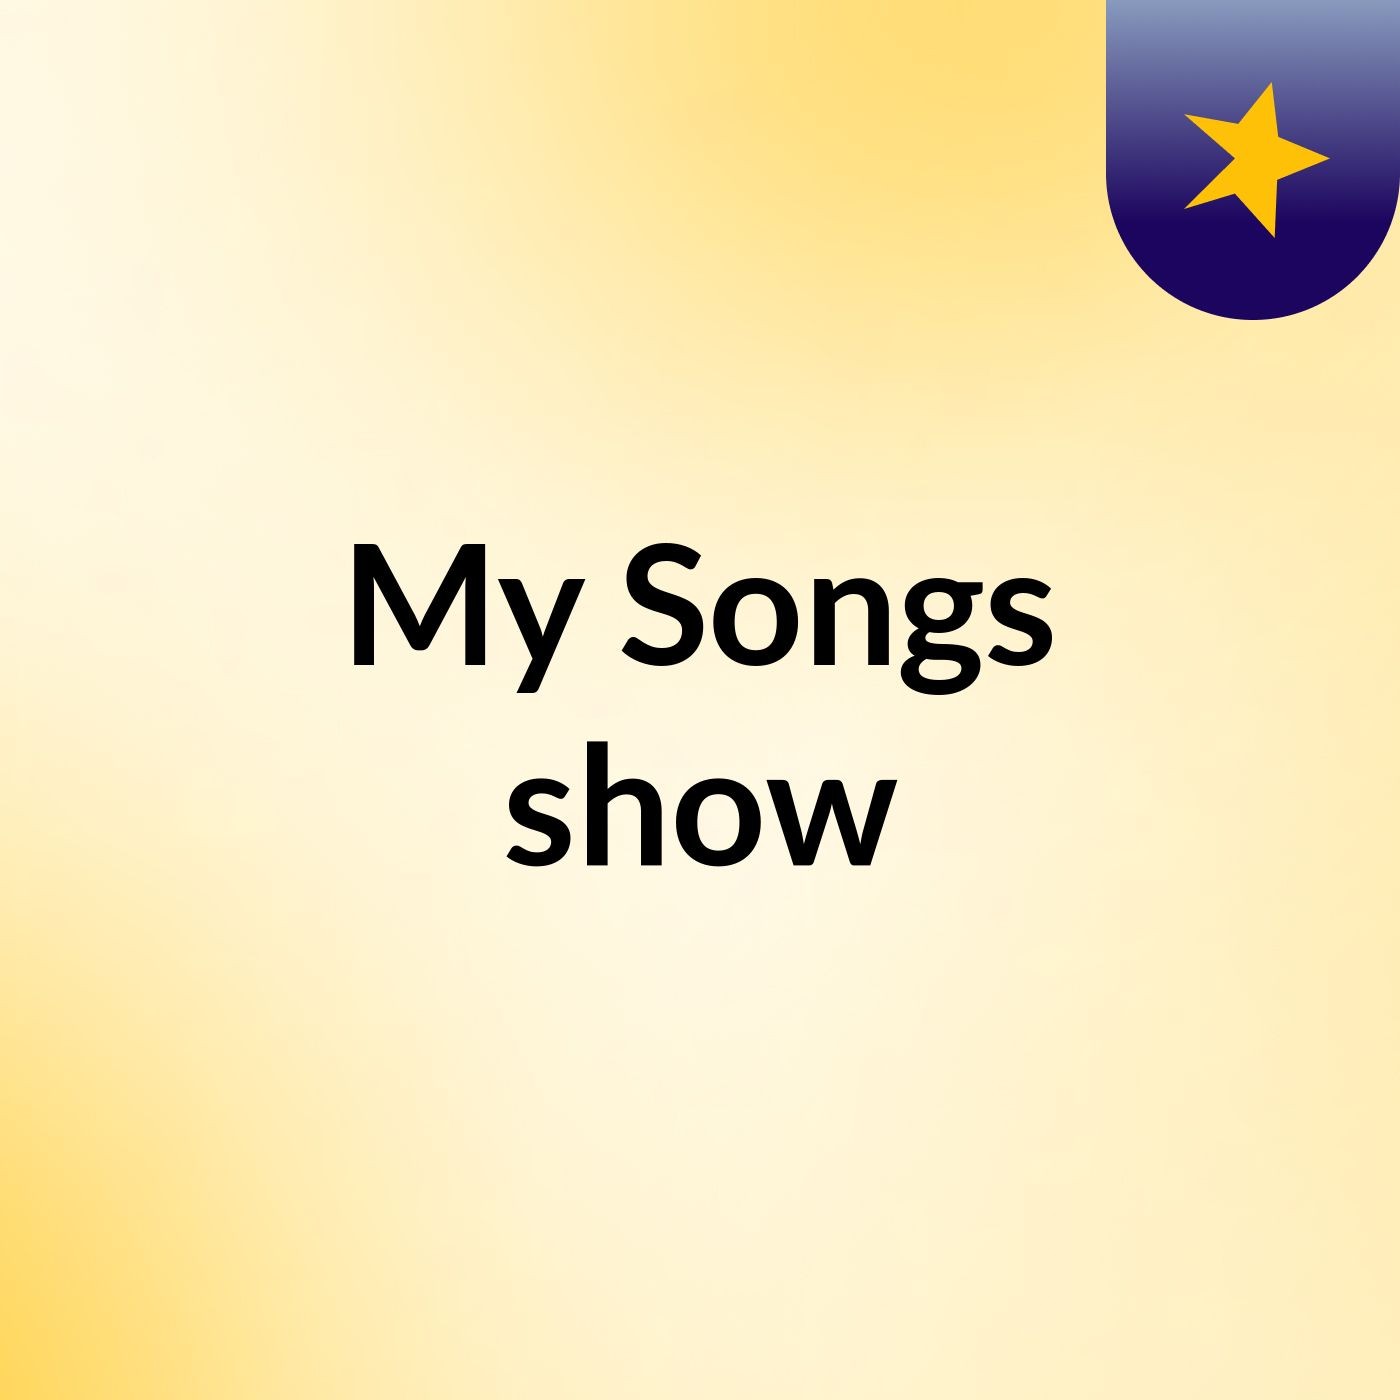 My Songs show